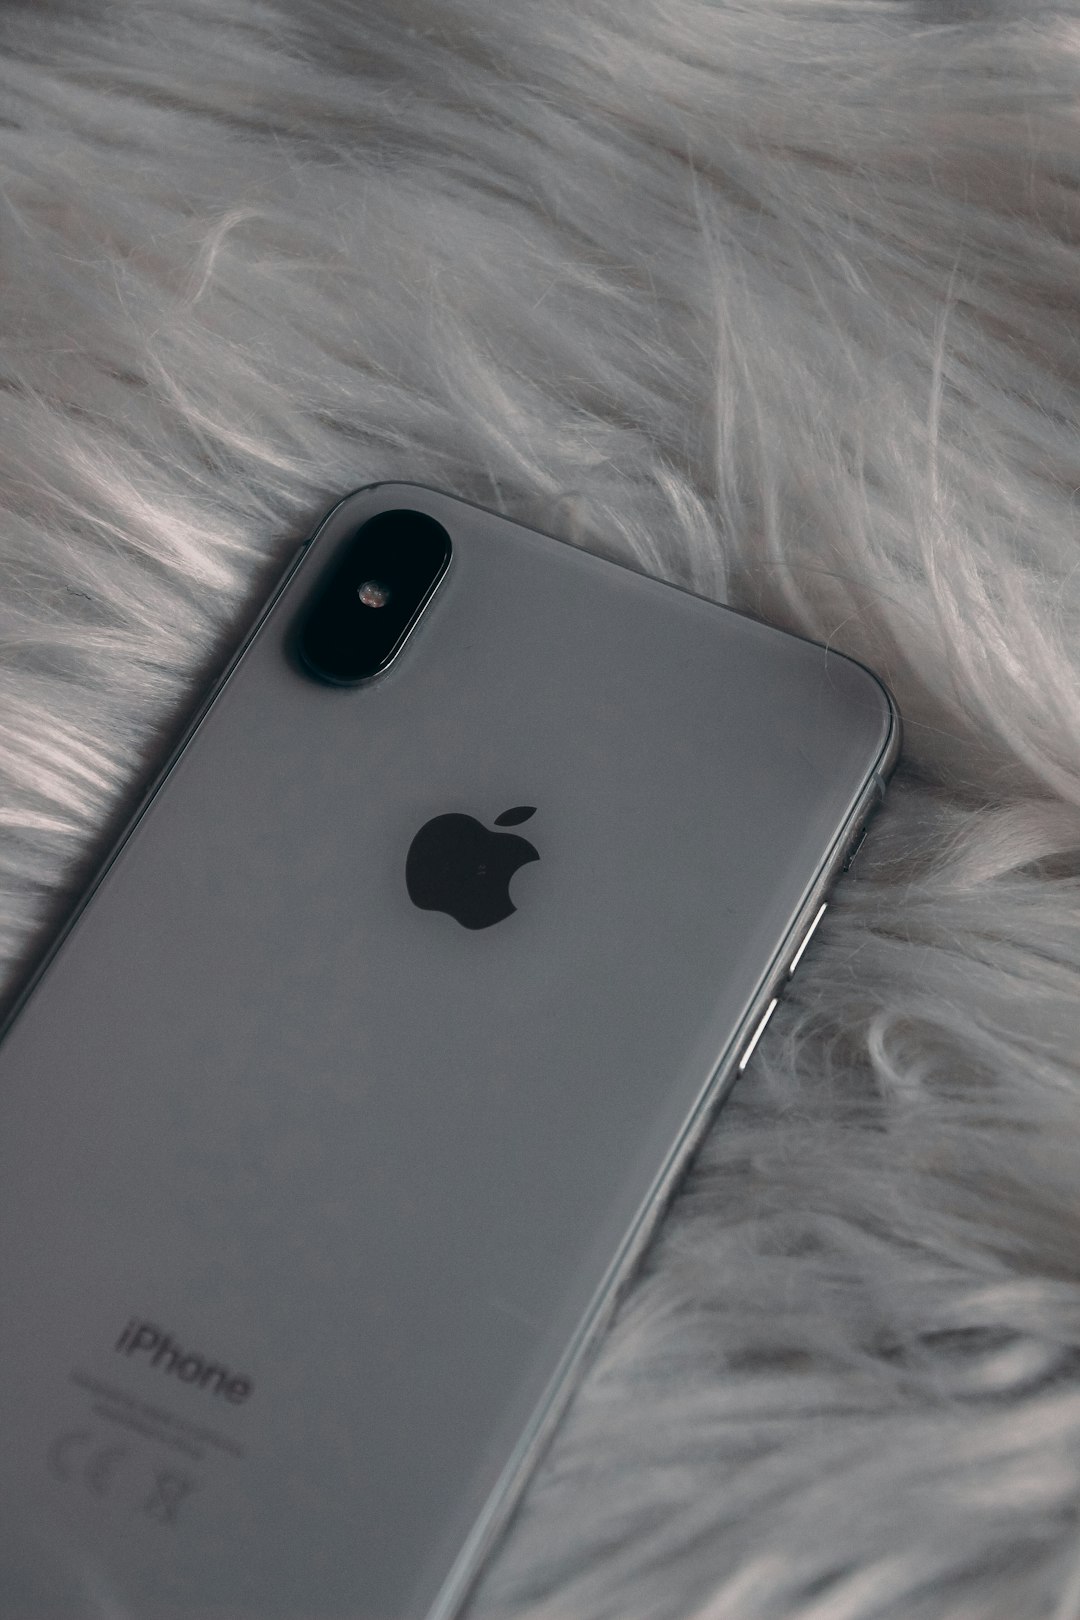 silver iphone 6 on white textile